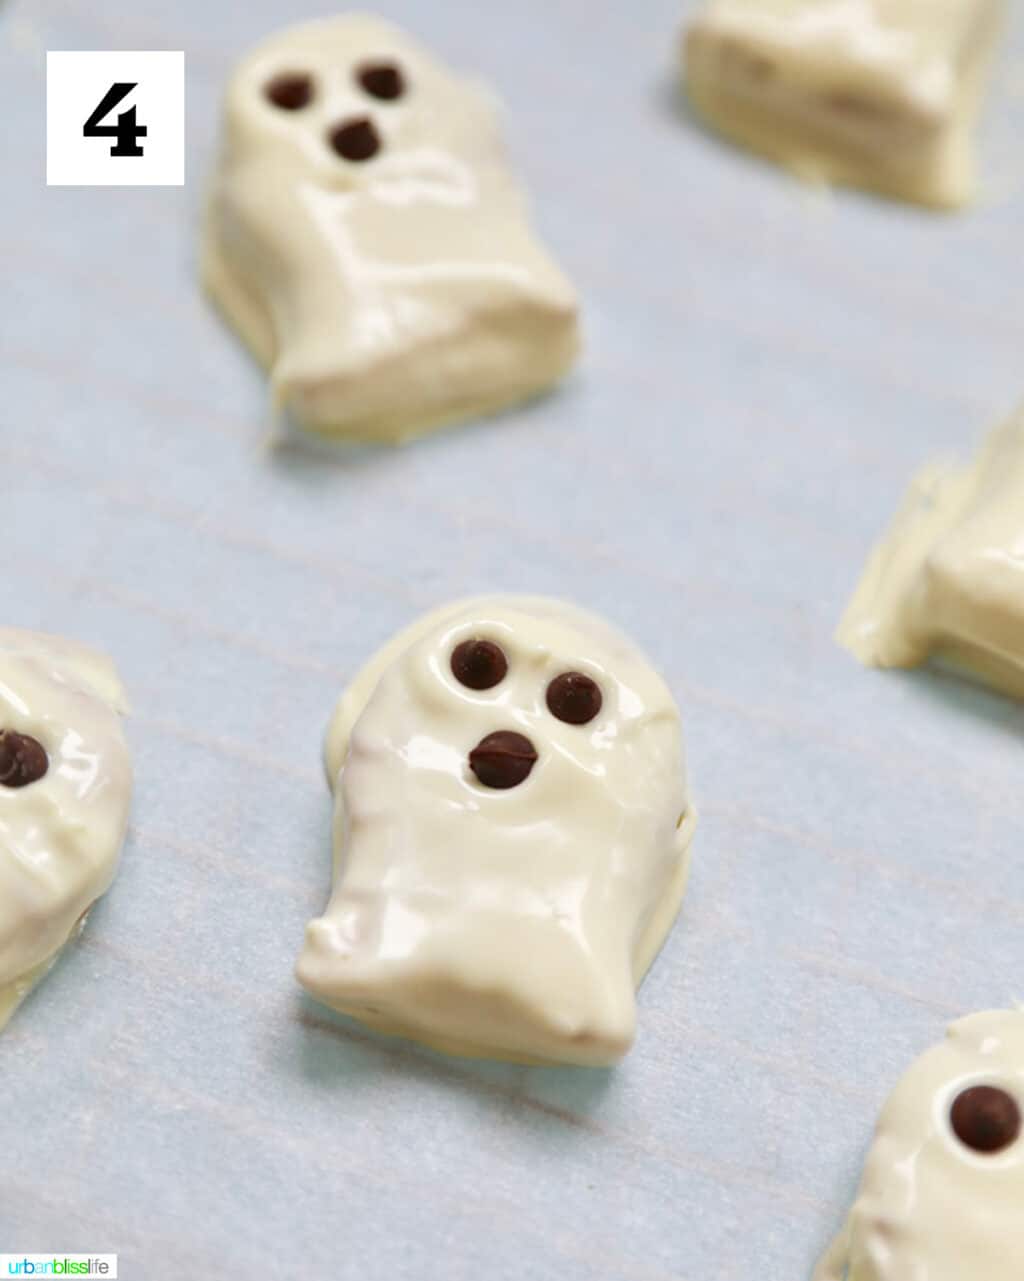 Nutter Butter cookies dipped in white chocolate with chocolate chips.